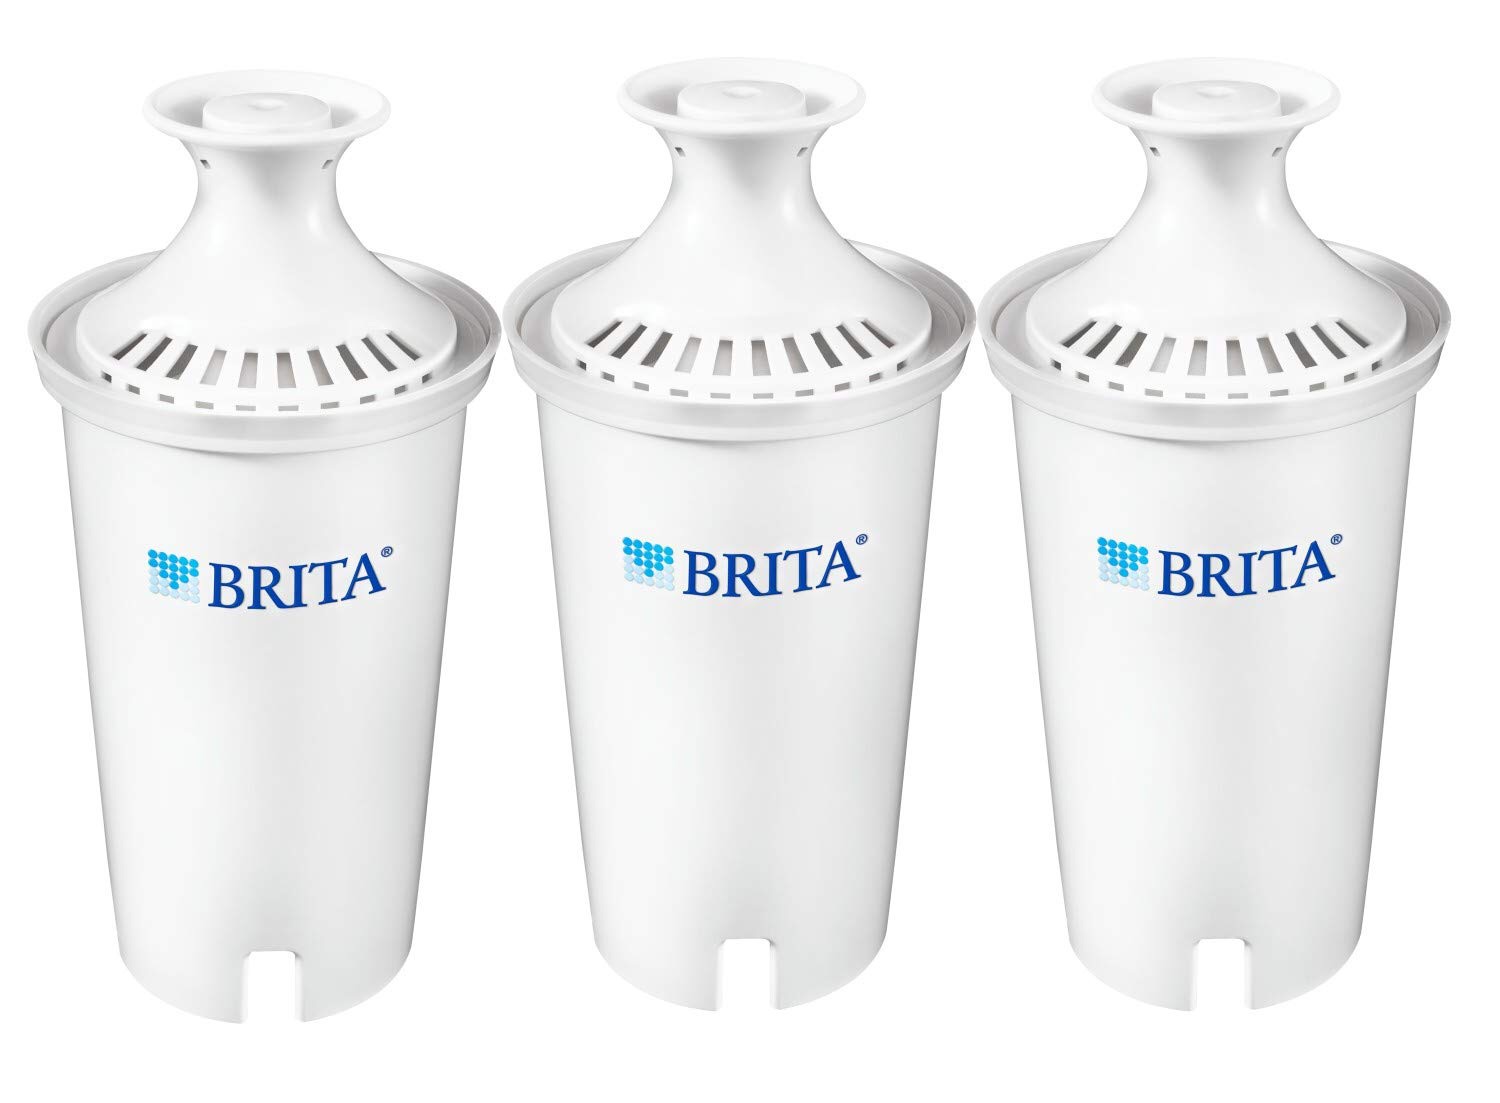 Amazon.com: Brita Water Replacement Filters for Pitchers and Dispensers, 3ct, White: Pitcher Water Filters: Kitchen & Dining 过滤水芯三个装